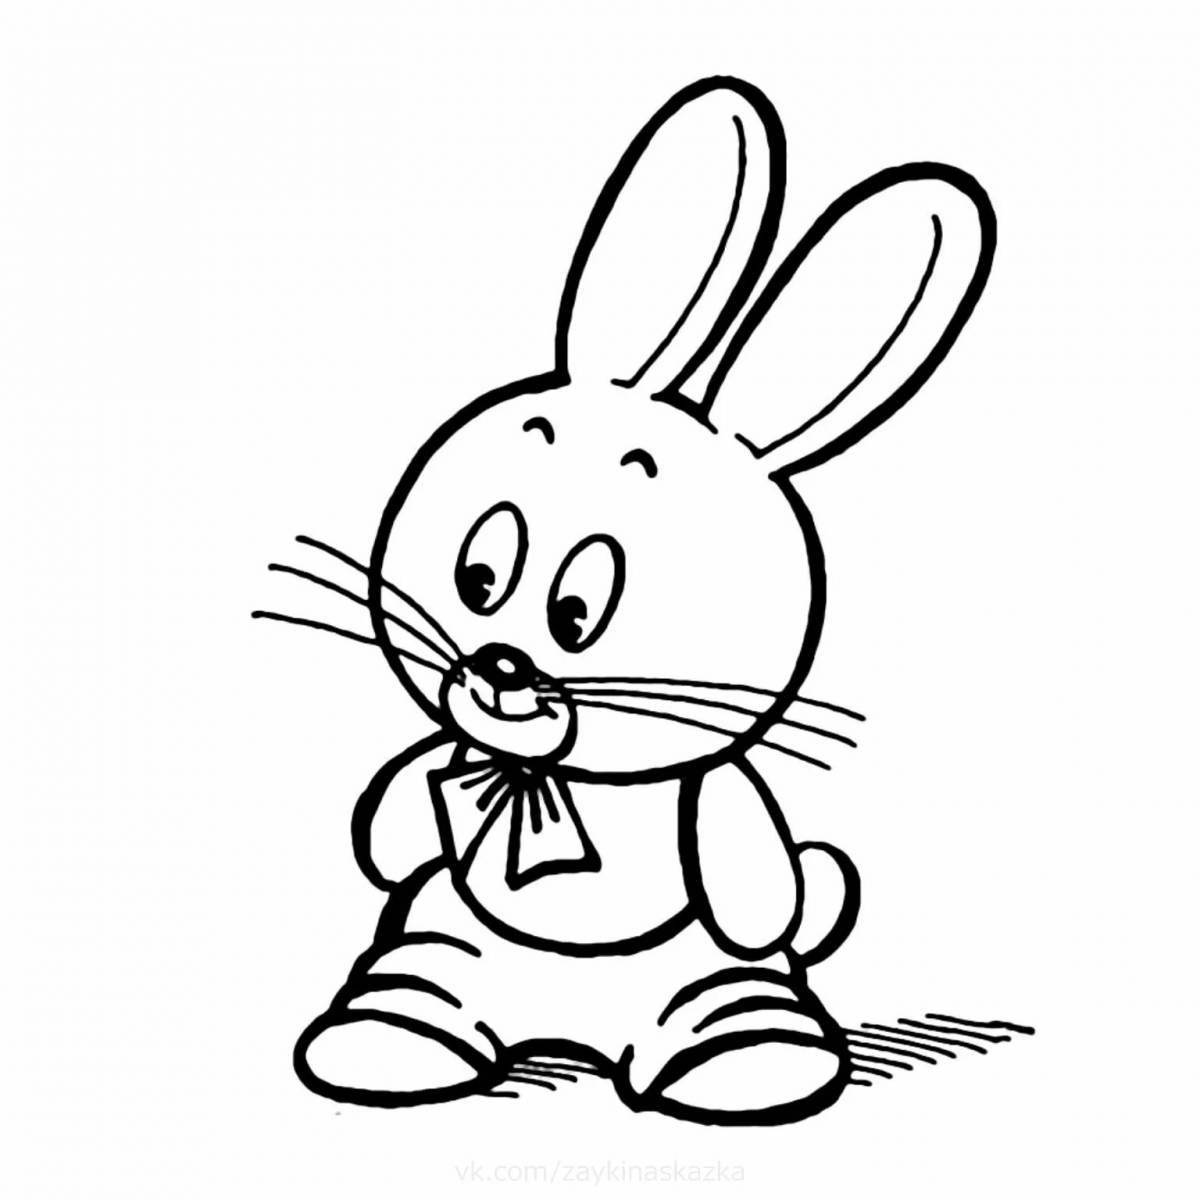 Gorgeous bunny drawing for kids